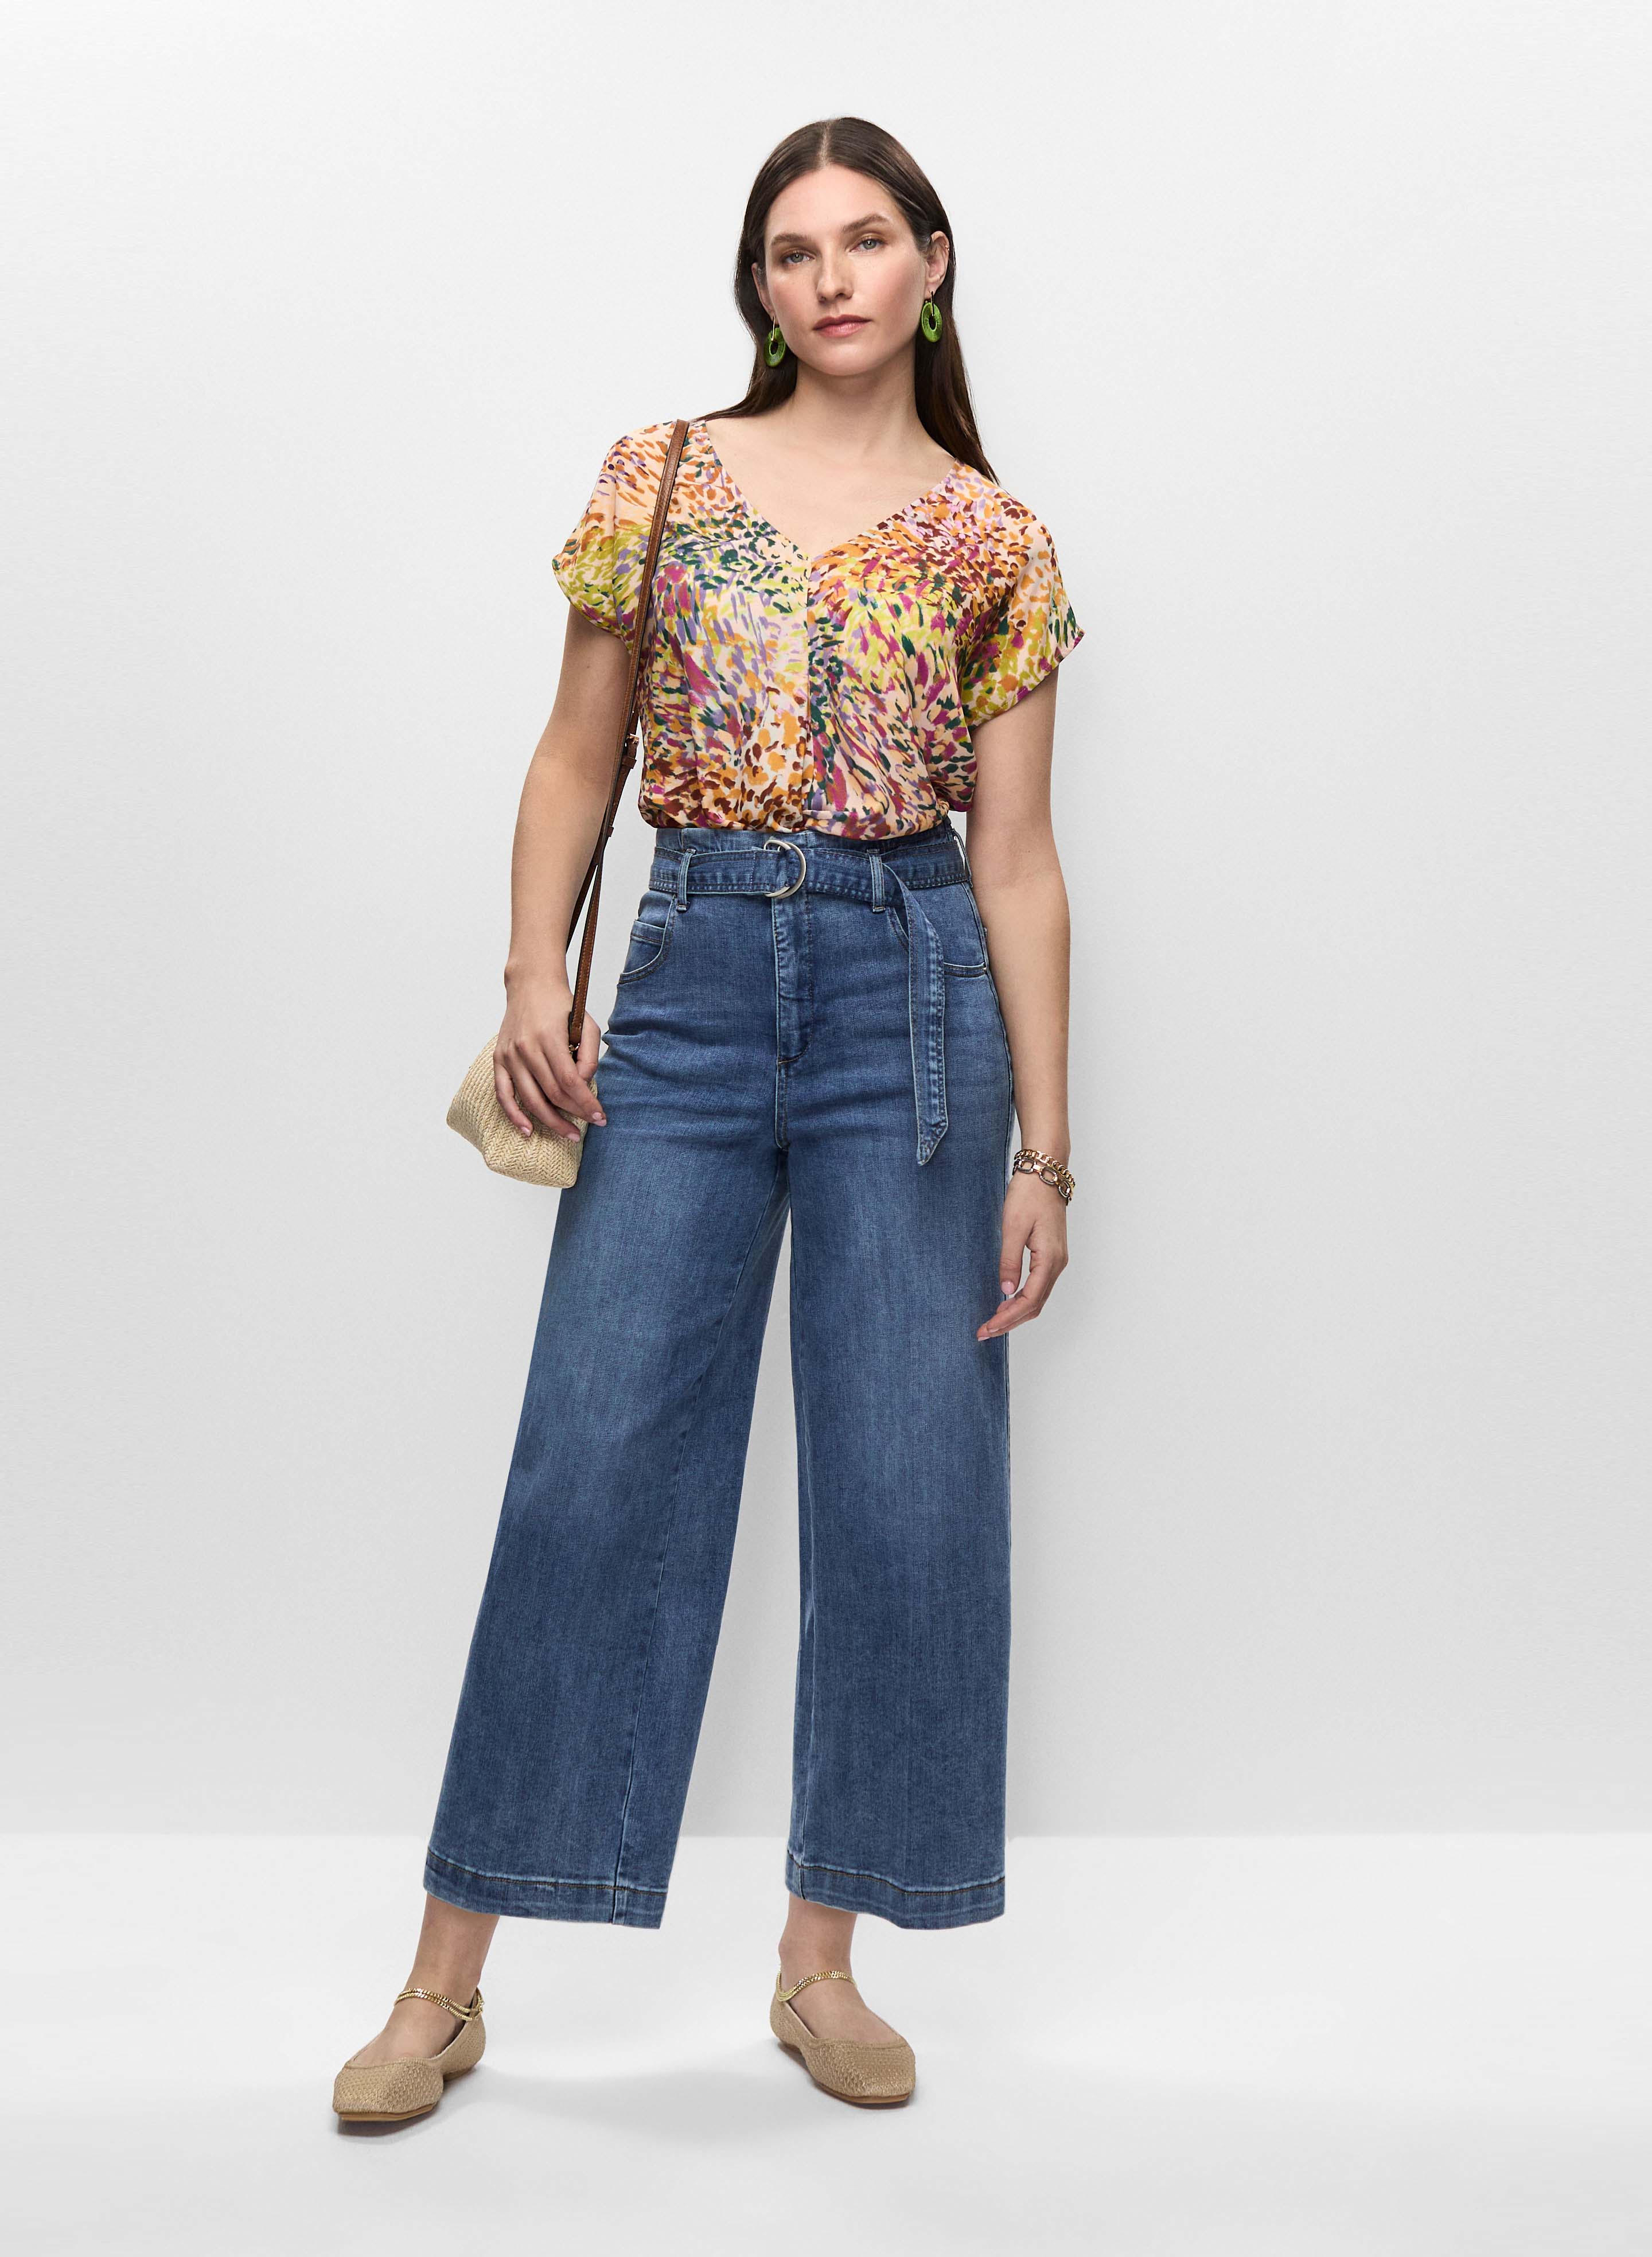 Printed Wrap-Style Top & Belted Culotte Jeans